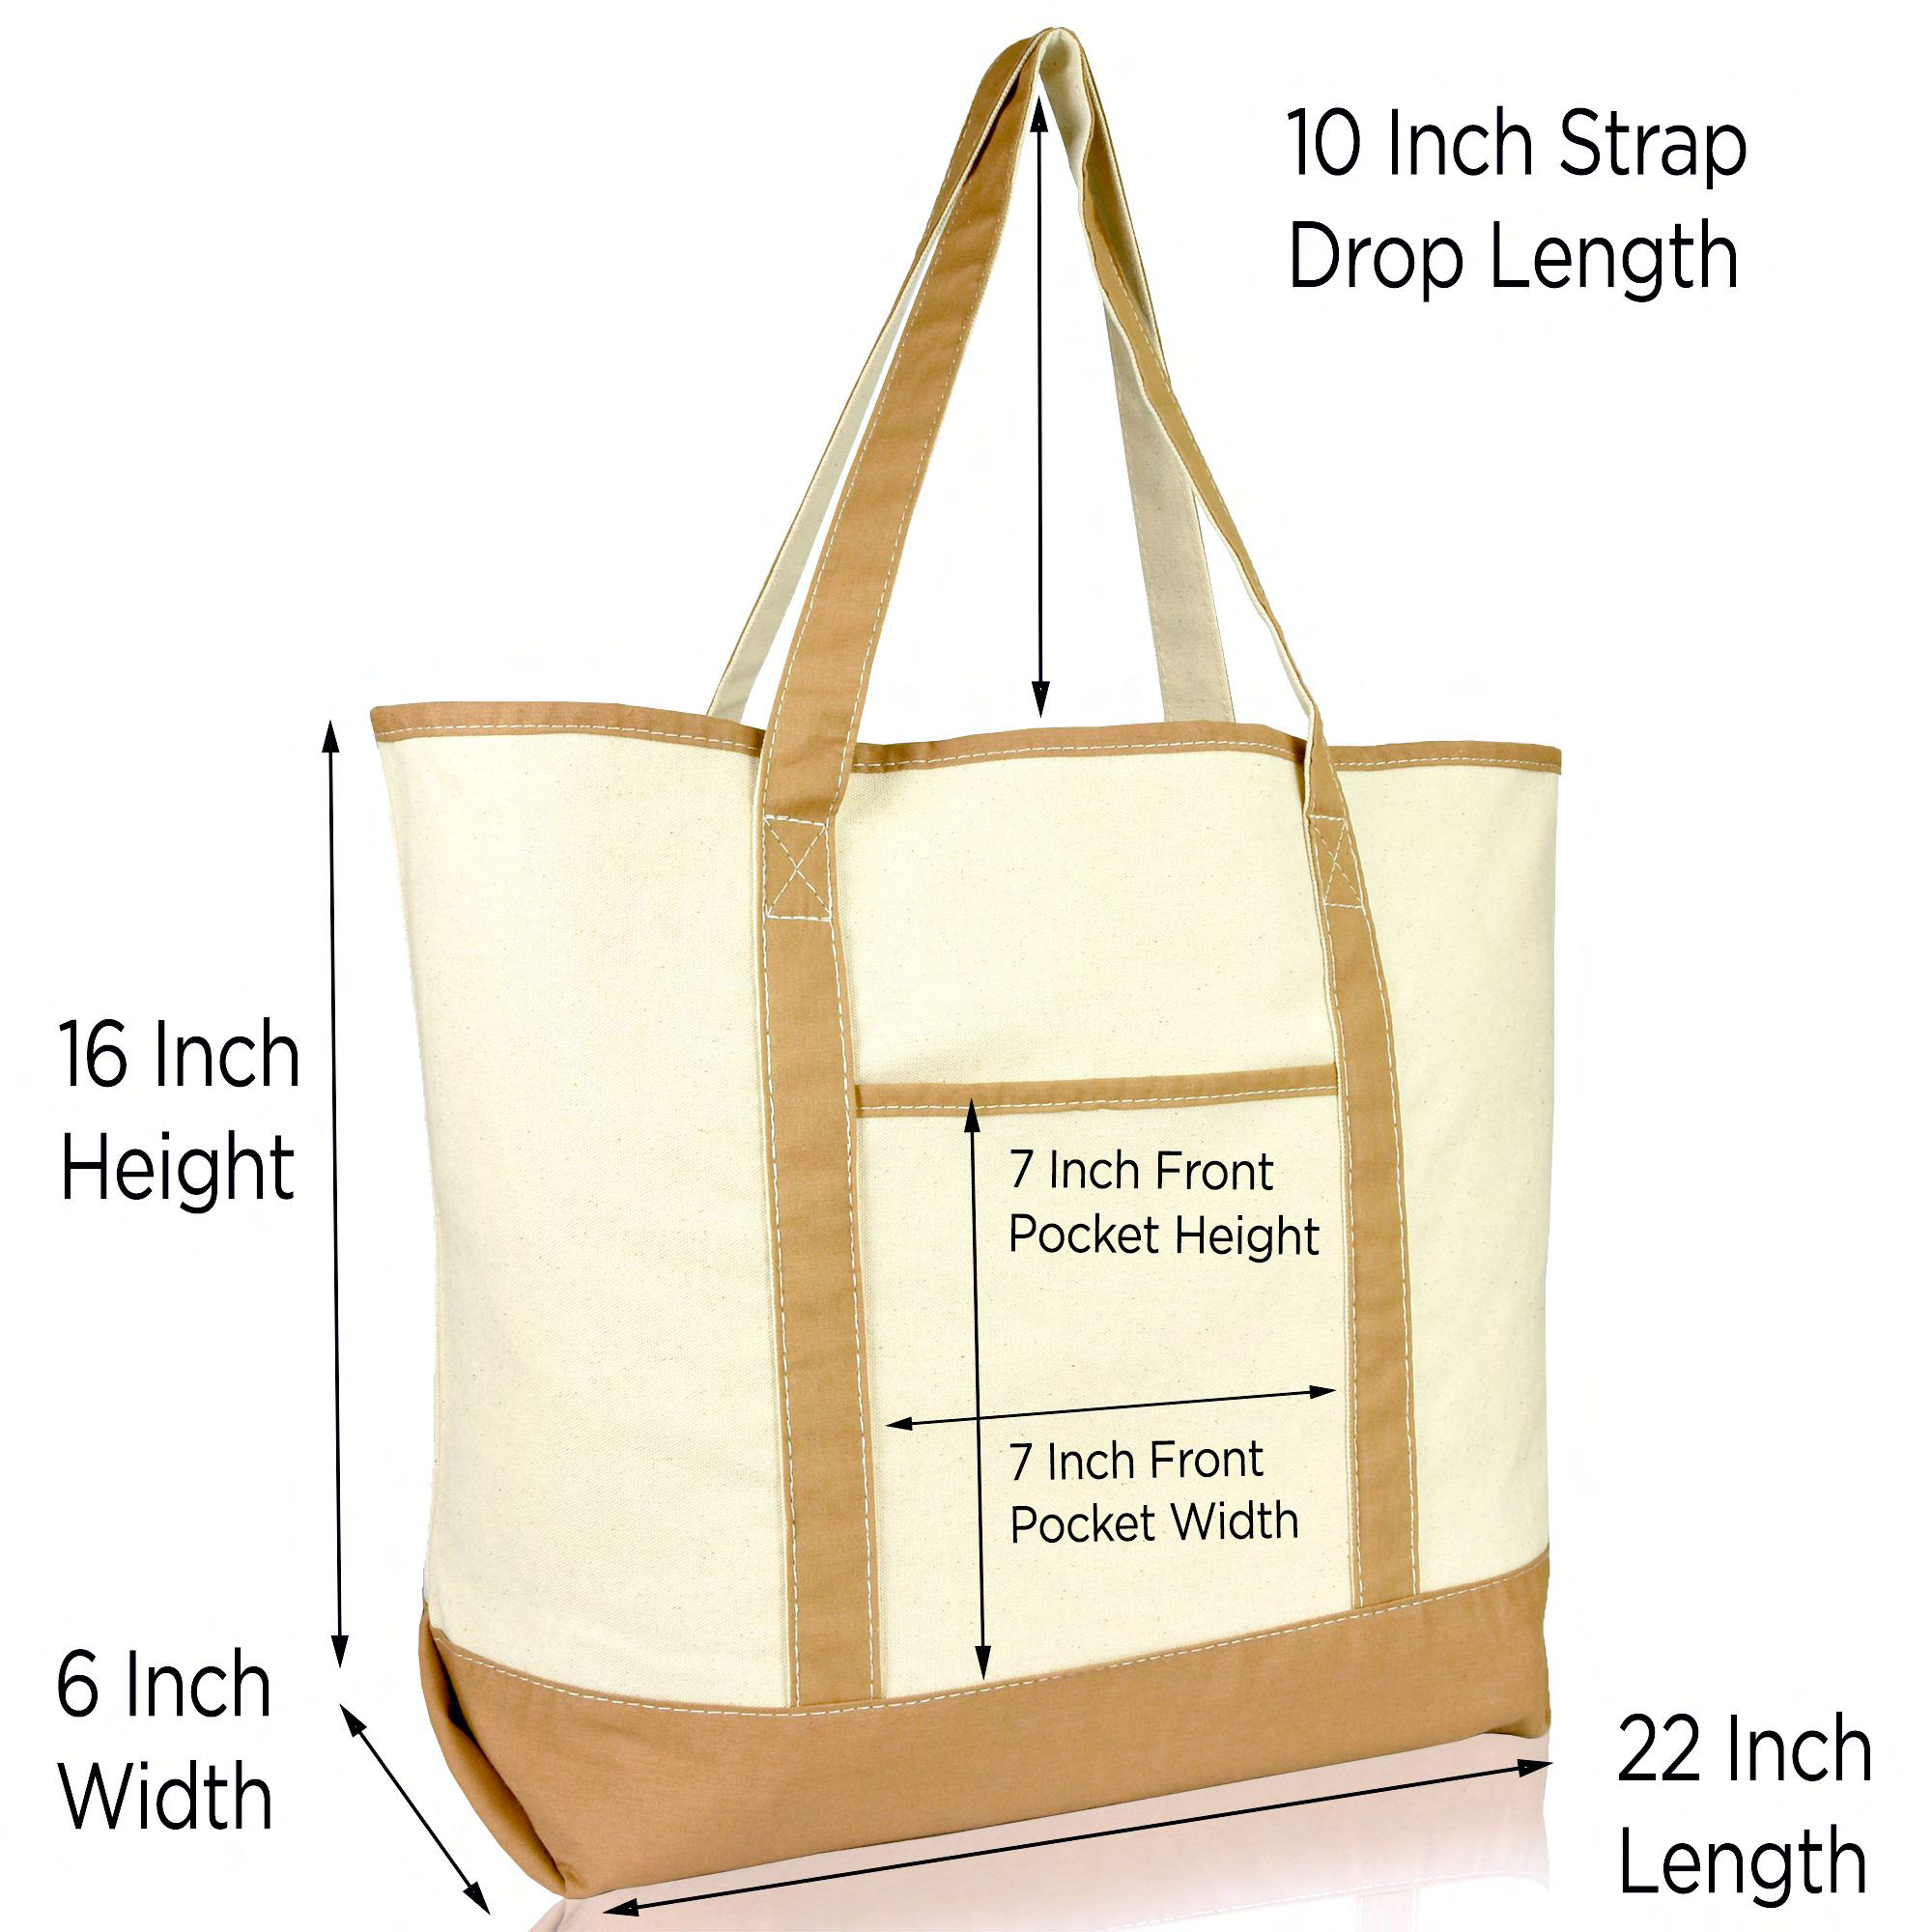 DALIX 22" Open Top Deluxe Tote Bag with Outer Pocket in Brown - image 2 of 5